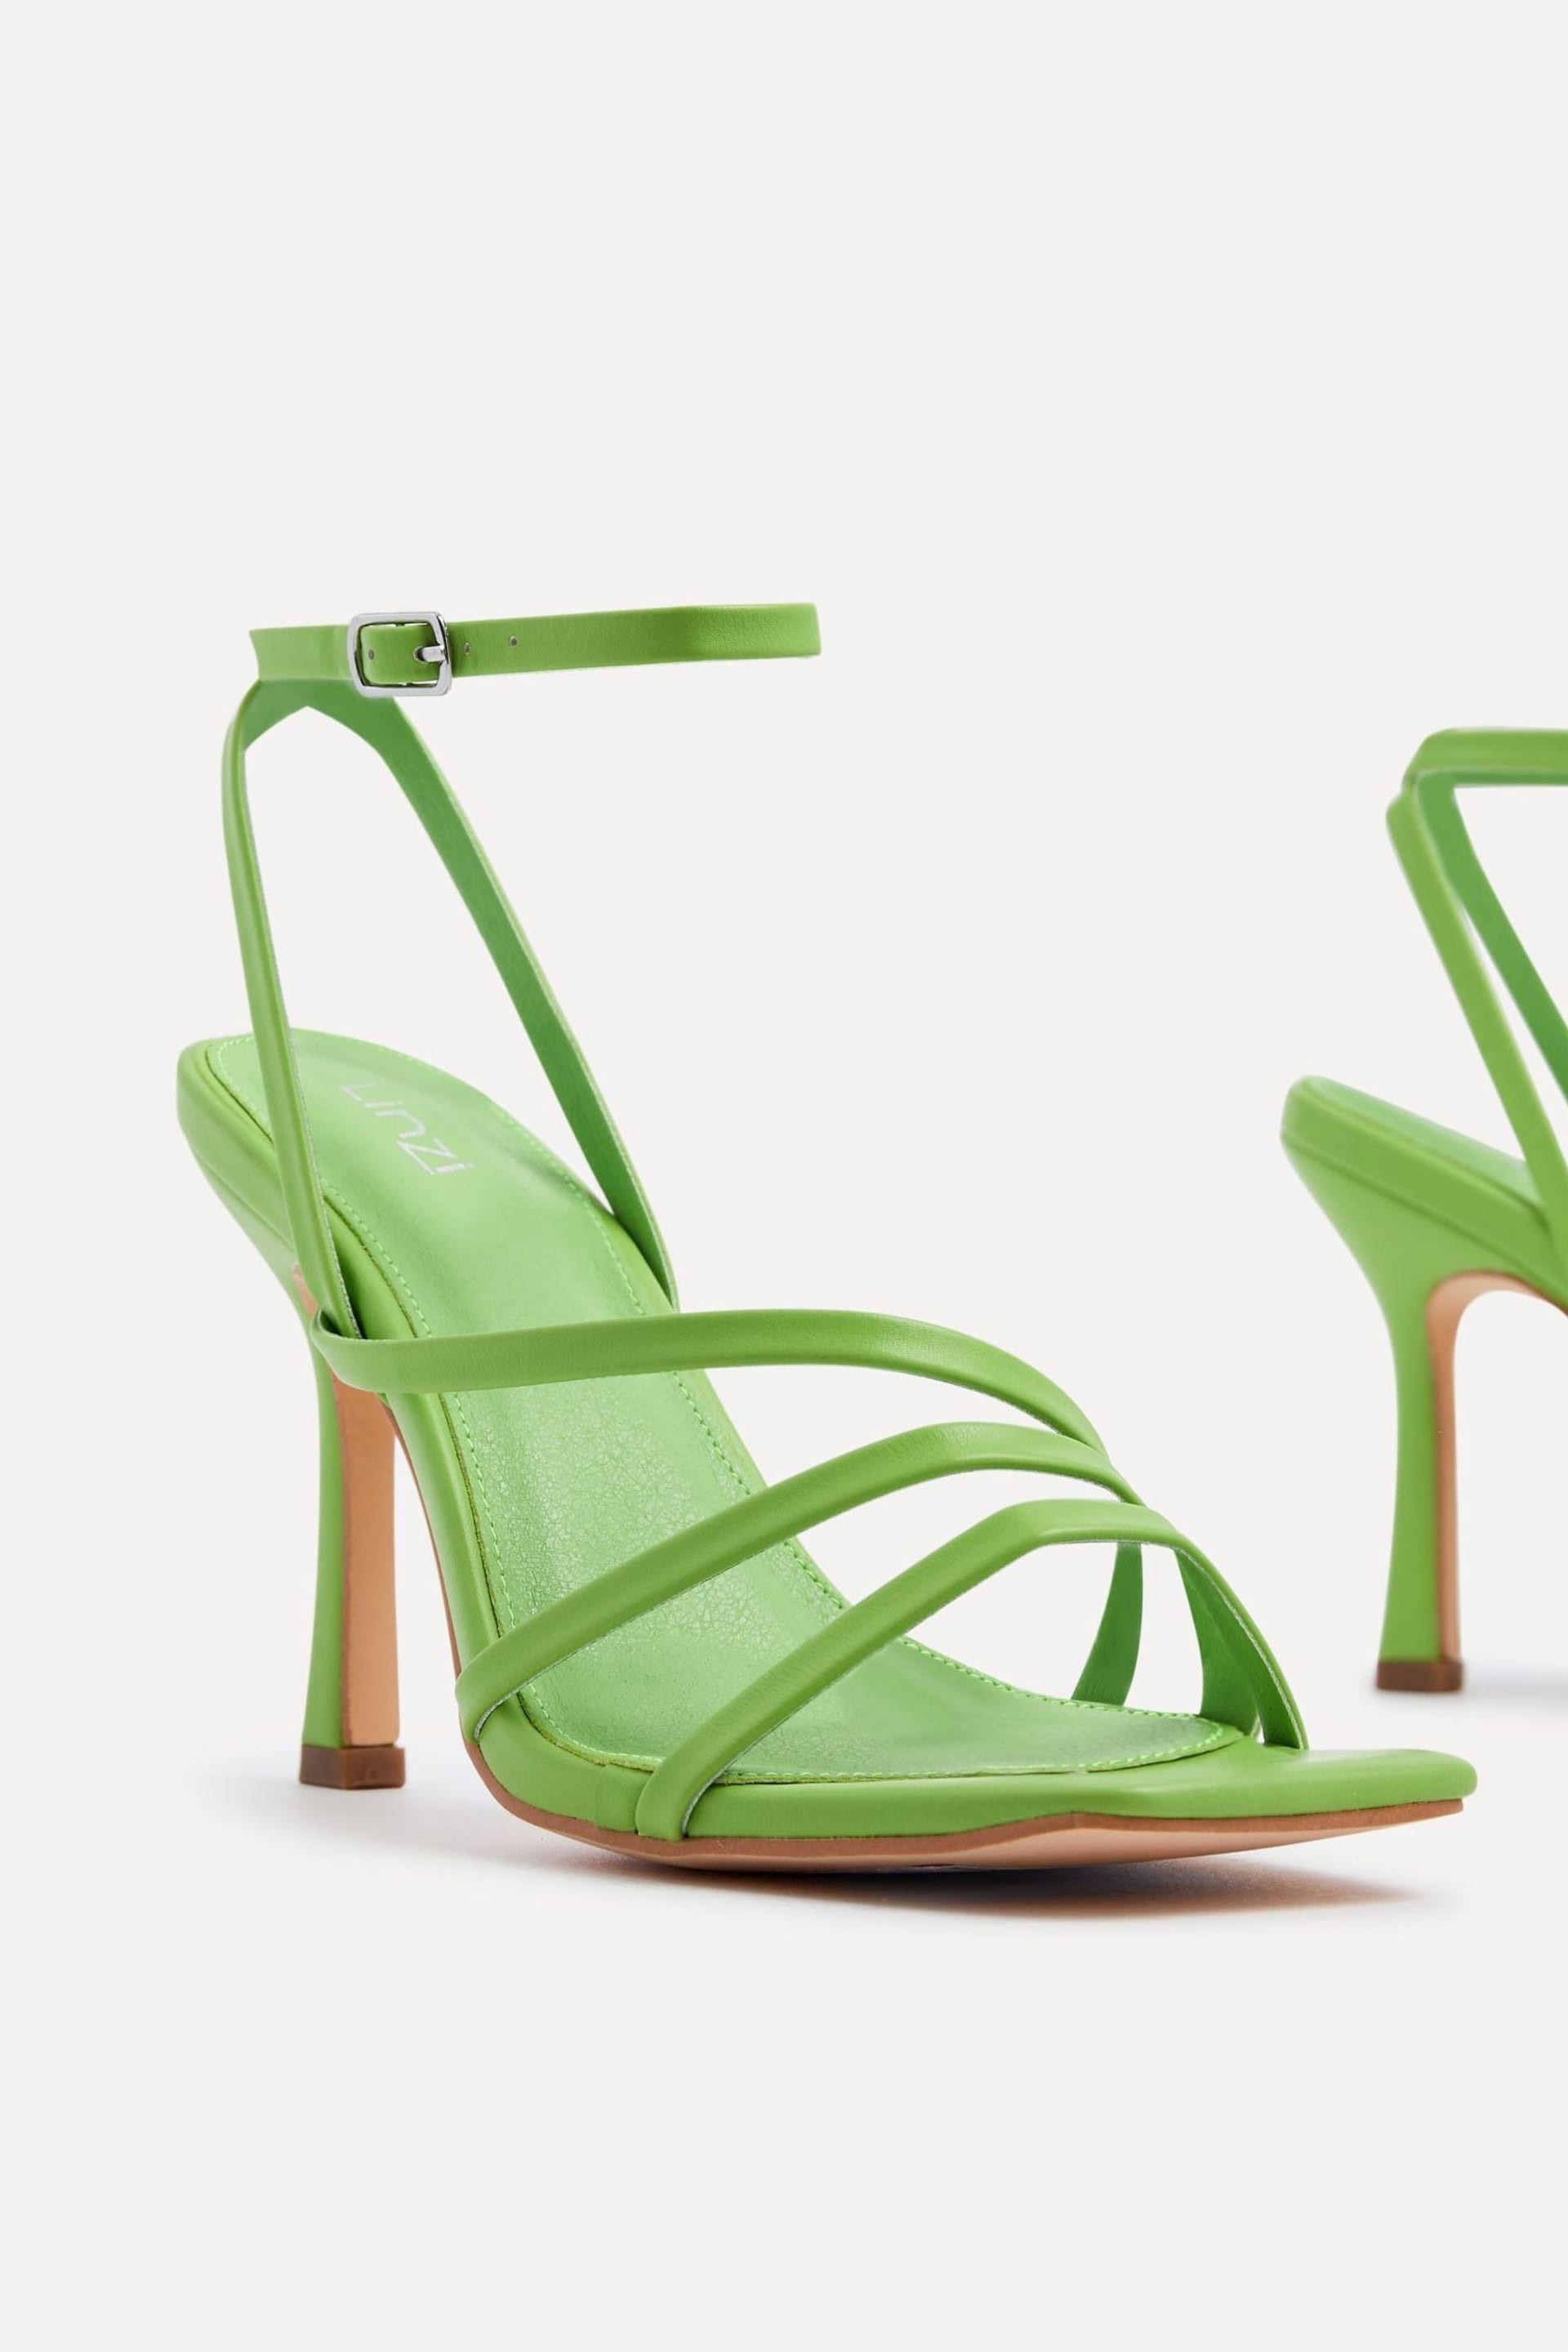 Linzi Green Scarlett Strappy Heel Sandals With Ankle Strap - Image 4 of 5